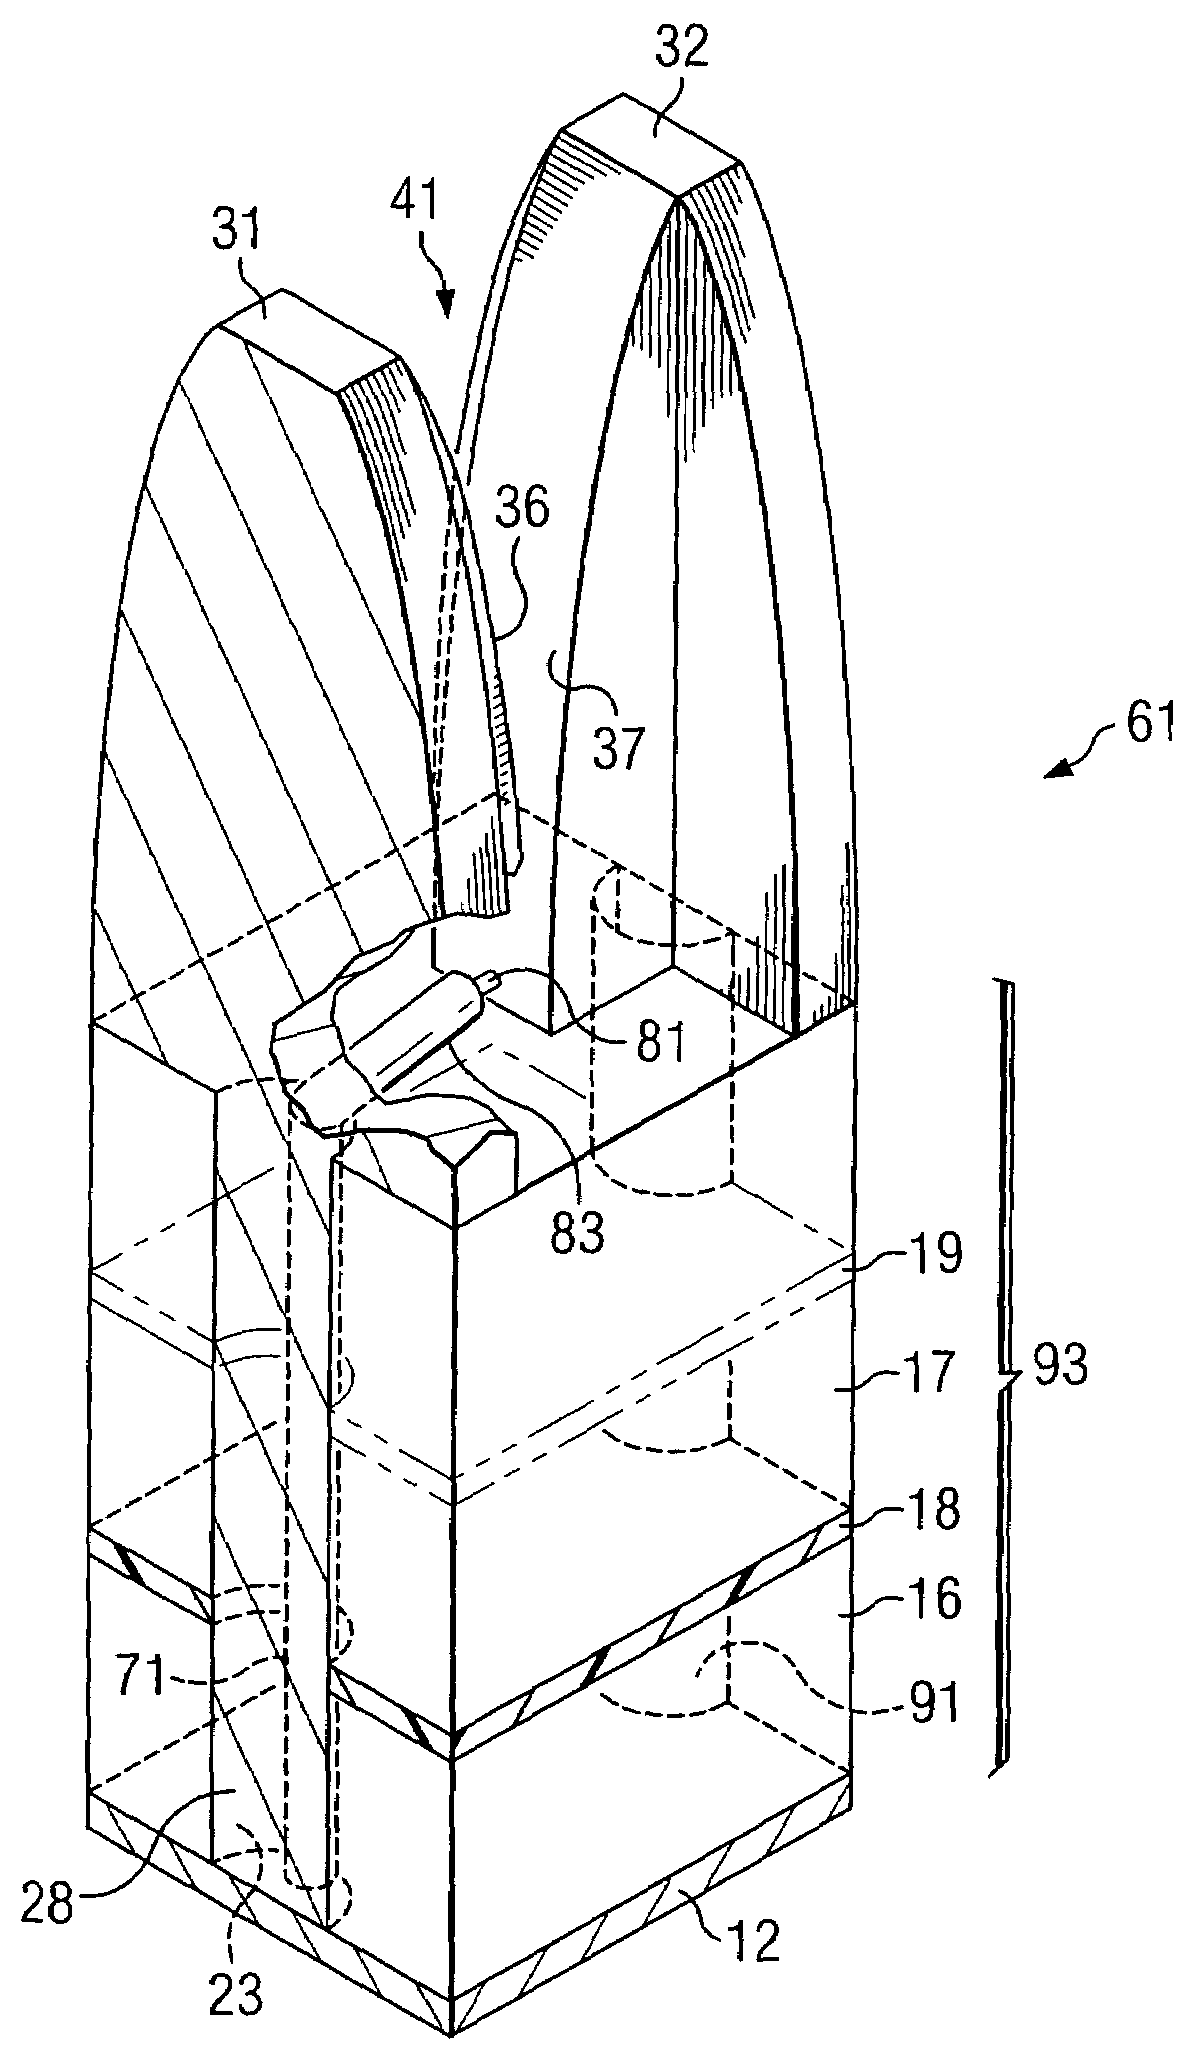 Method and apparatus for obtaining wideband performance in a tapered slot antenna